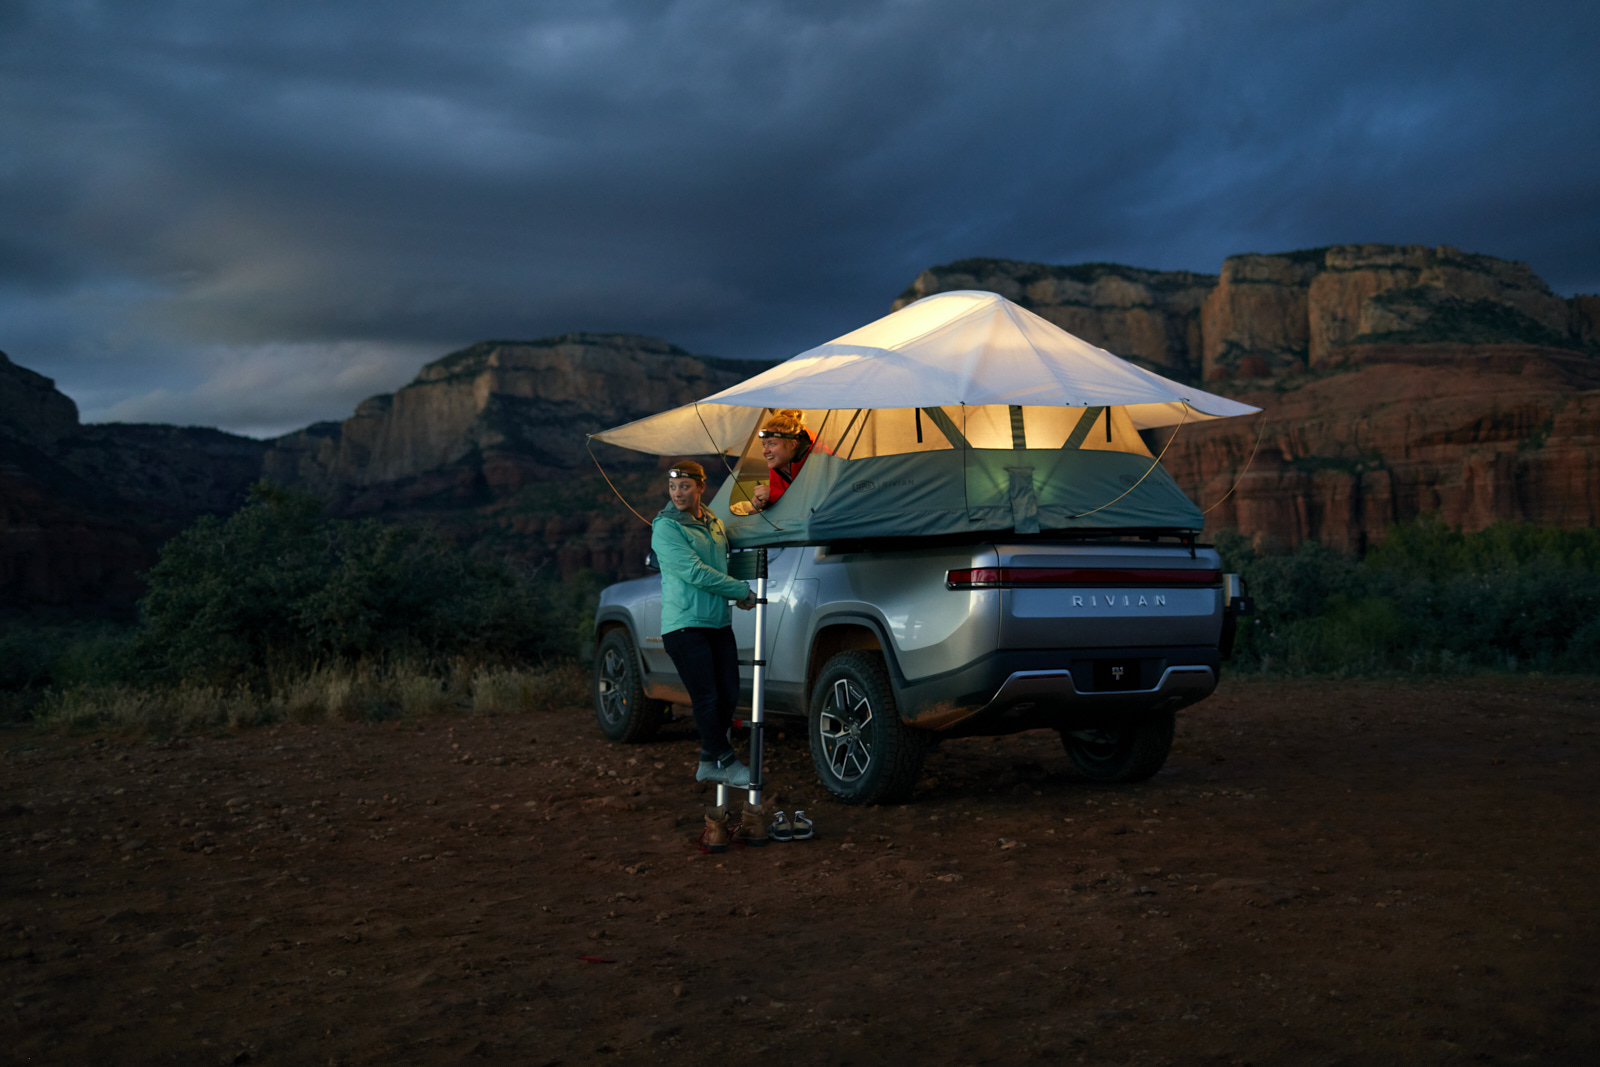 Automotive advertising directed and photographed by Dylan Johnston for electric vehicle Rivian. Shot on location in the Florida Keys throughout a weekend adventure fly fishing and camping in Arizona.